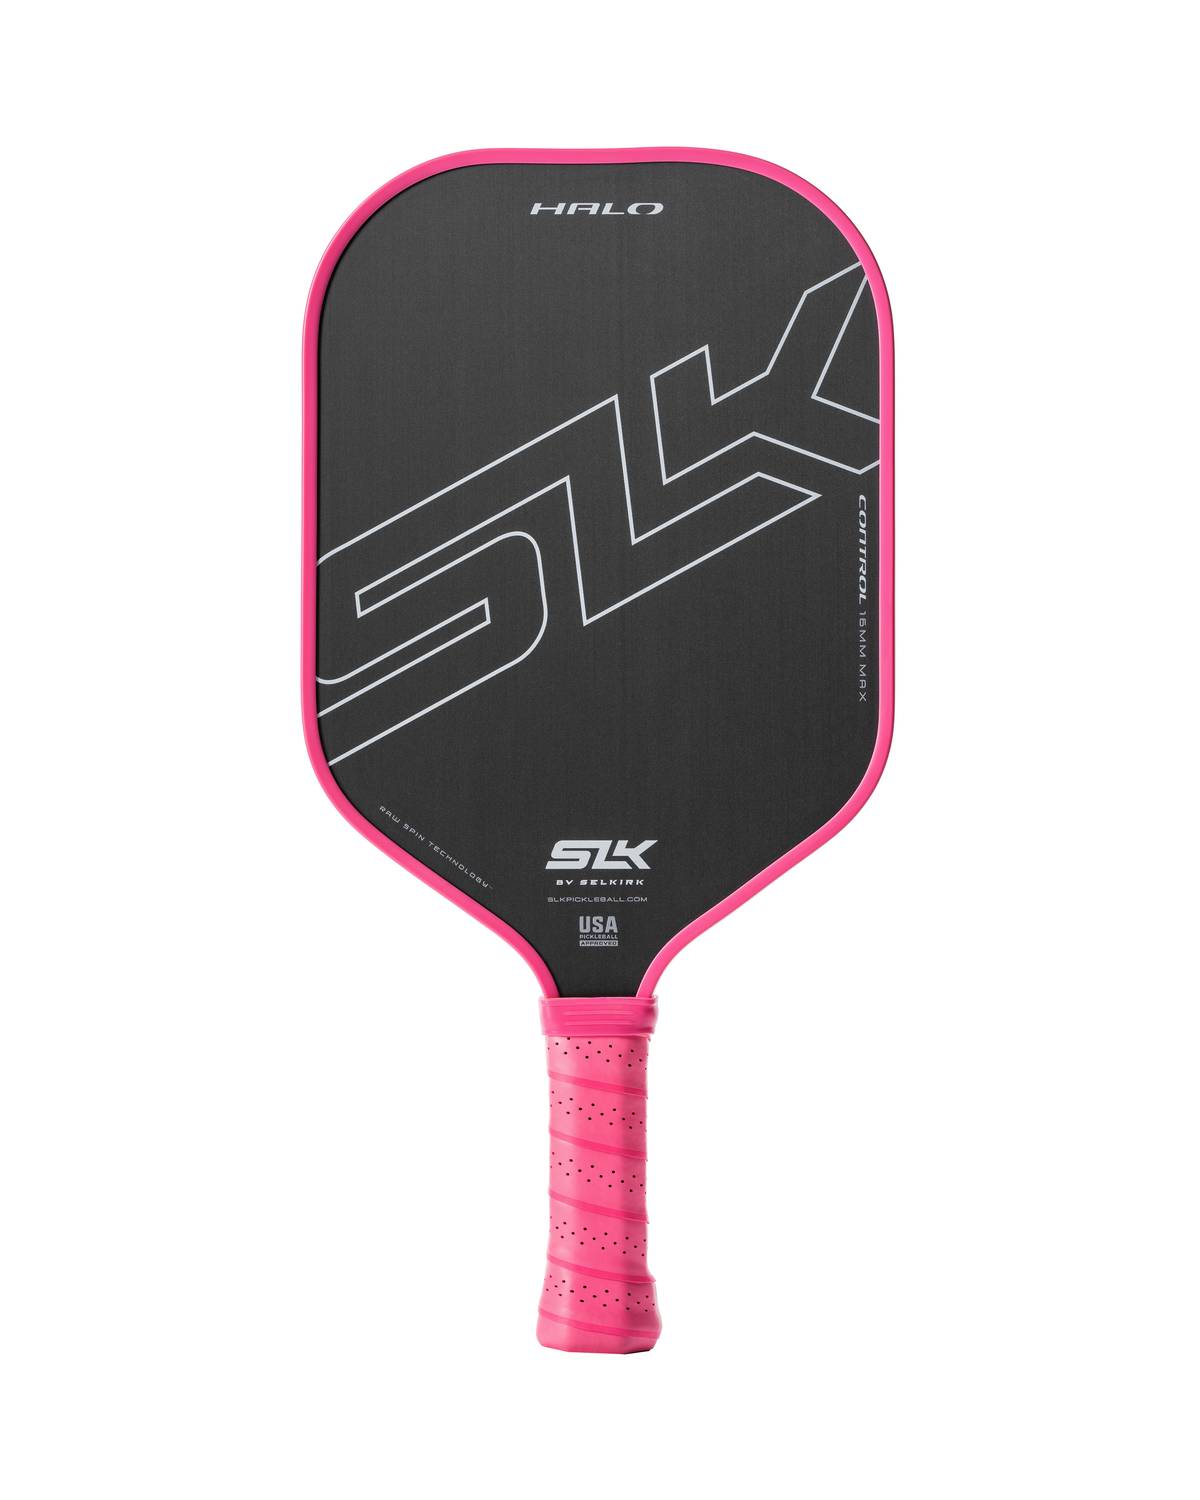 Choose a Selkirk SLK Halo Max Pickleball Paddle with the word slk on it.